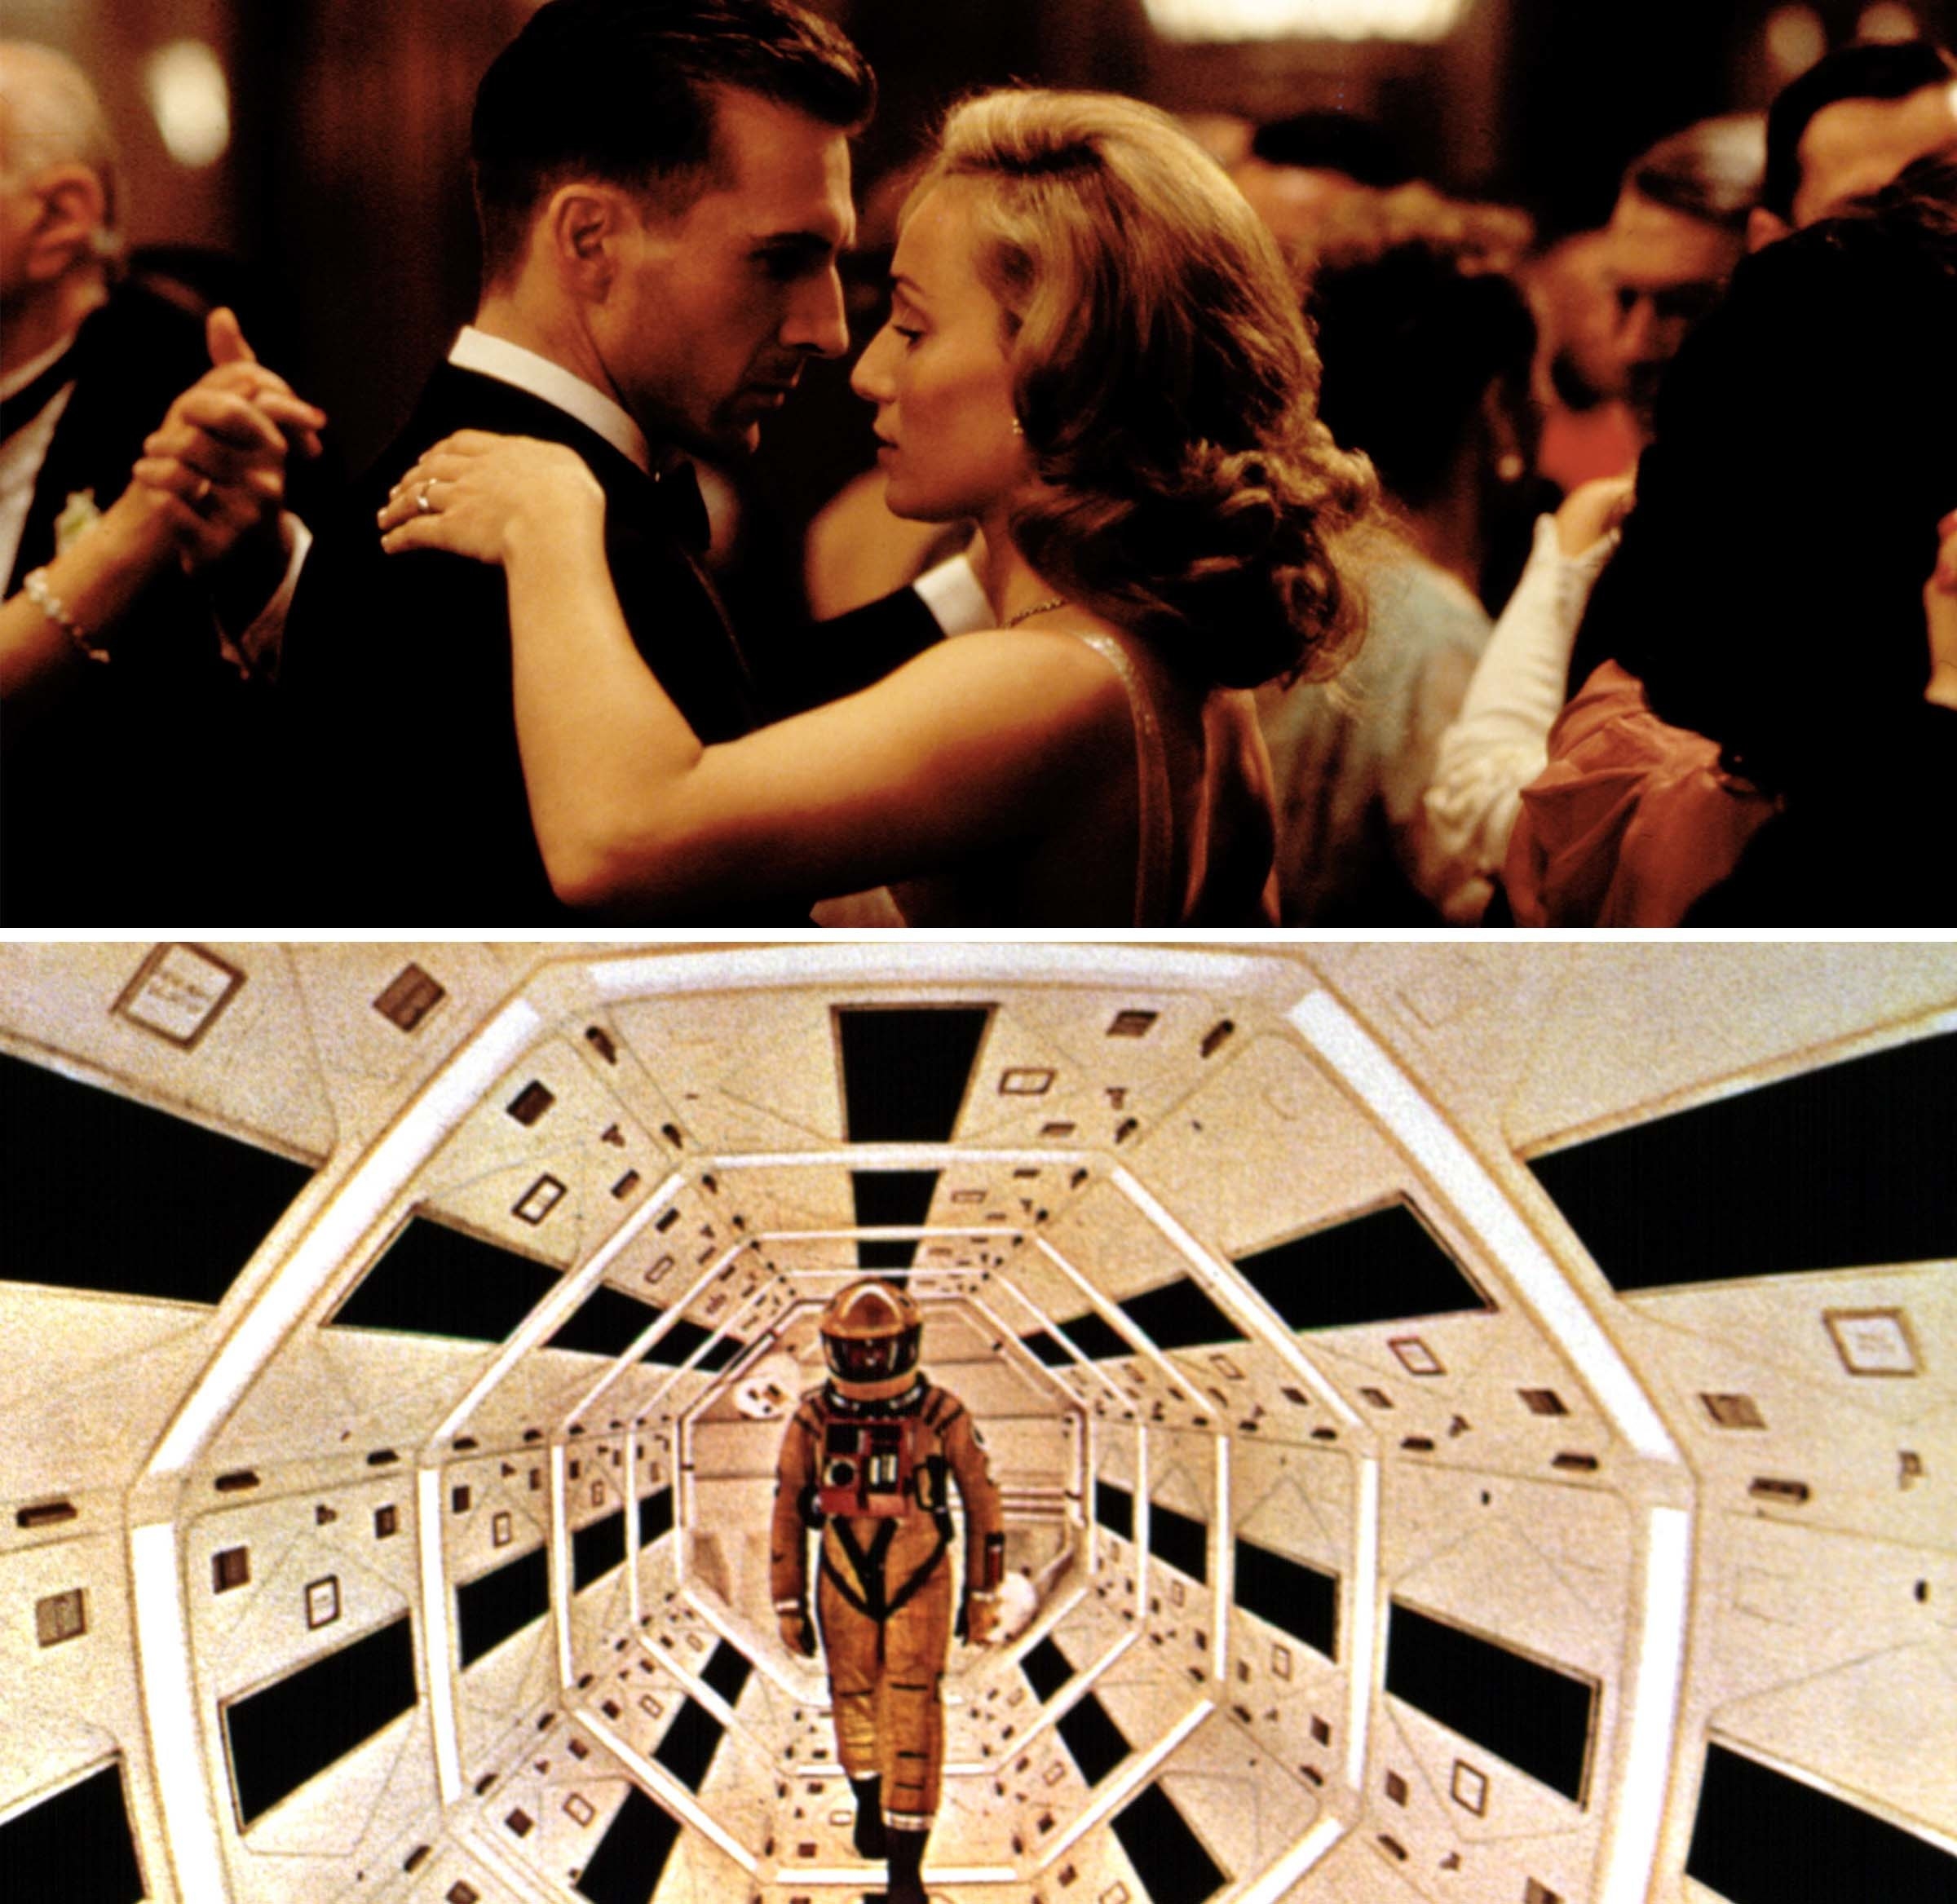 The English Patient and 2001 A Space Odyssey